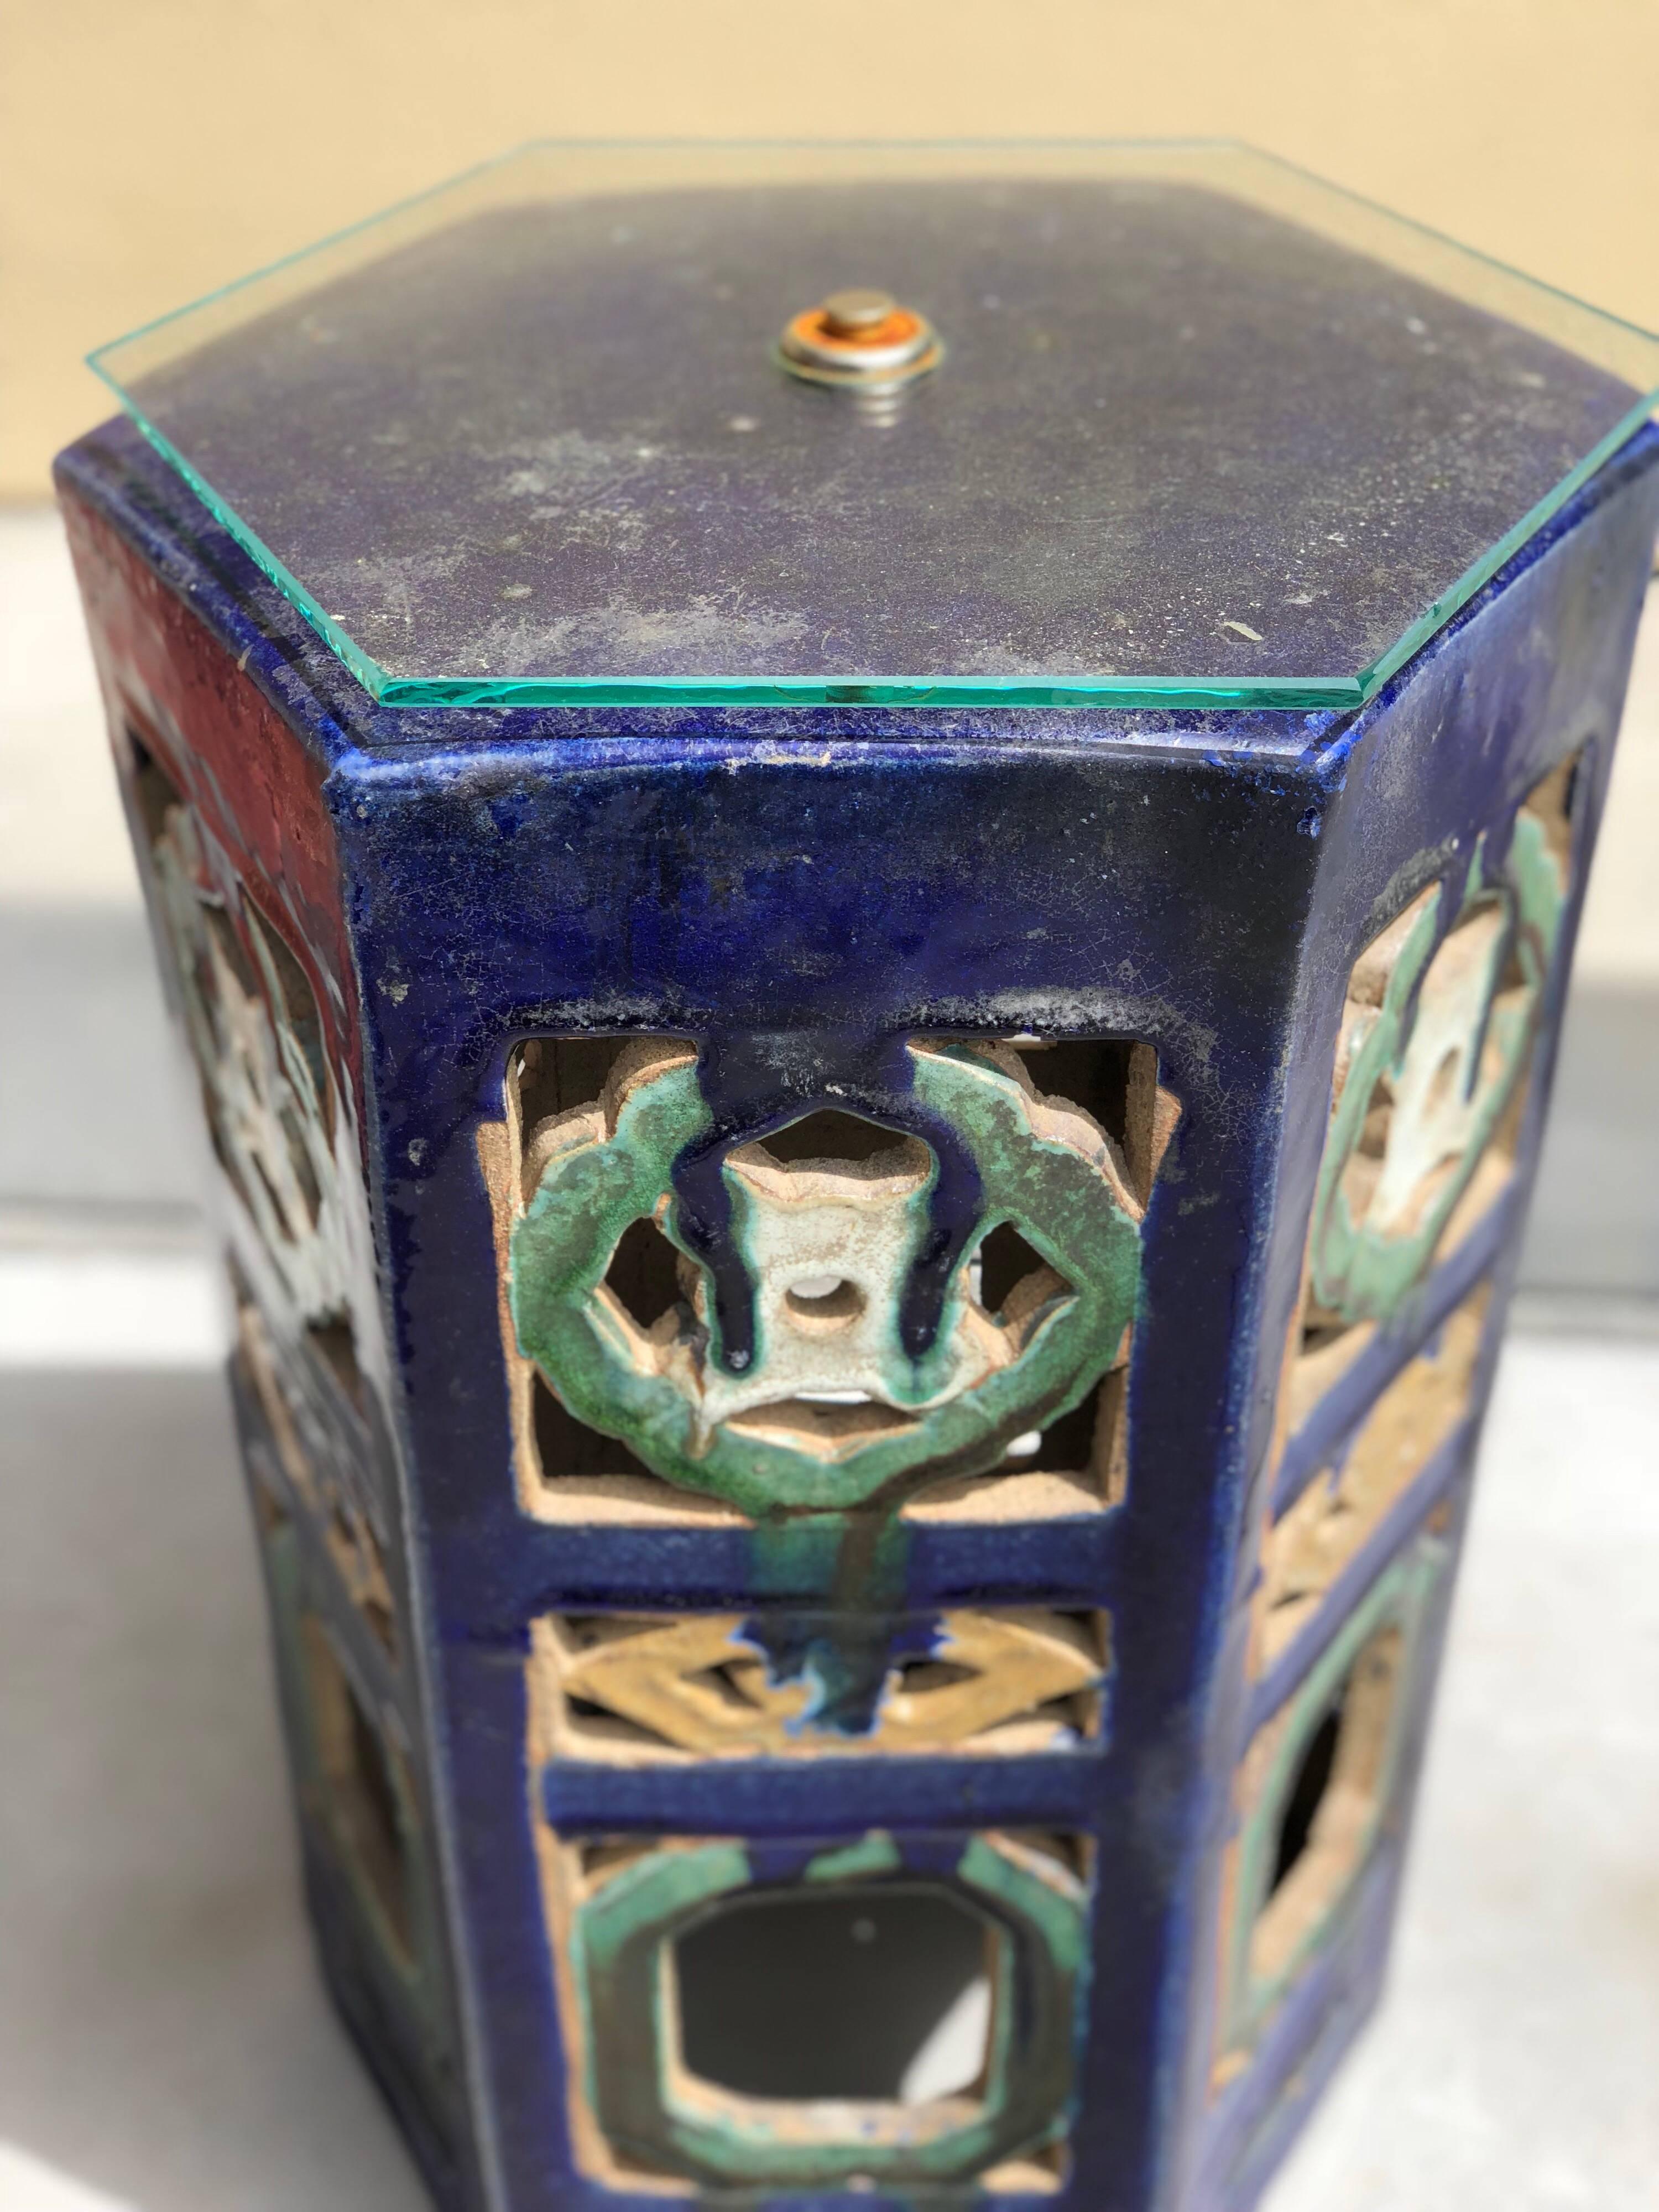 Garden Stool Blue Chinese Glazed Ceramic Porcelain Outdoor Indoor Side Table In Excellent Condition For Sale In Monterey, CA